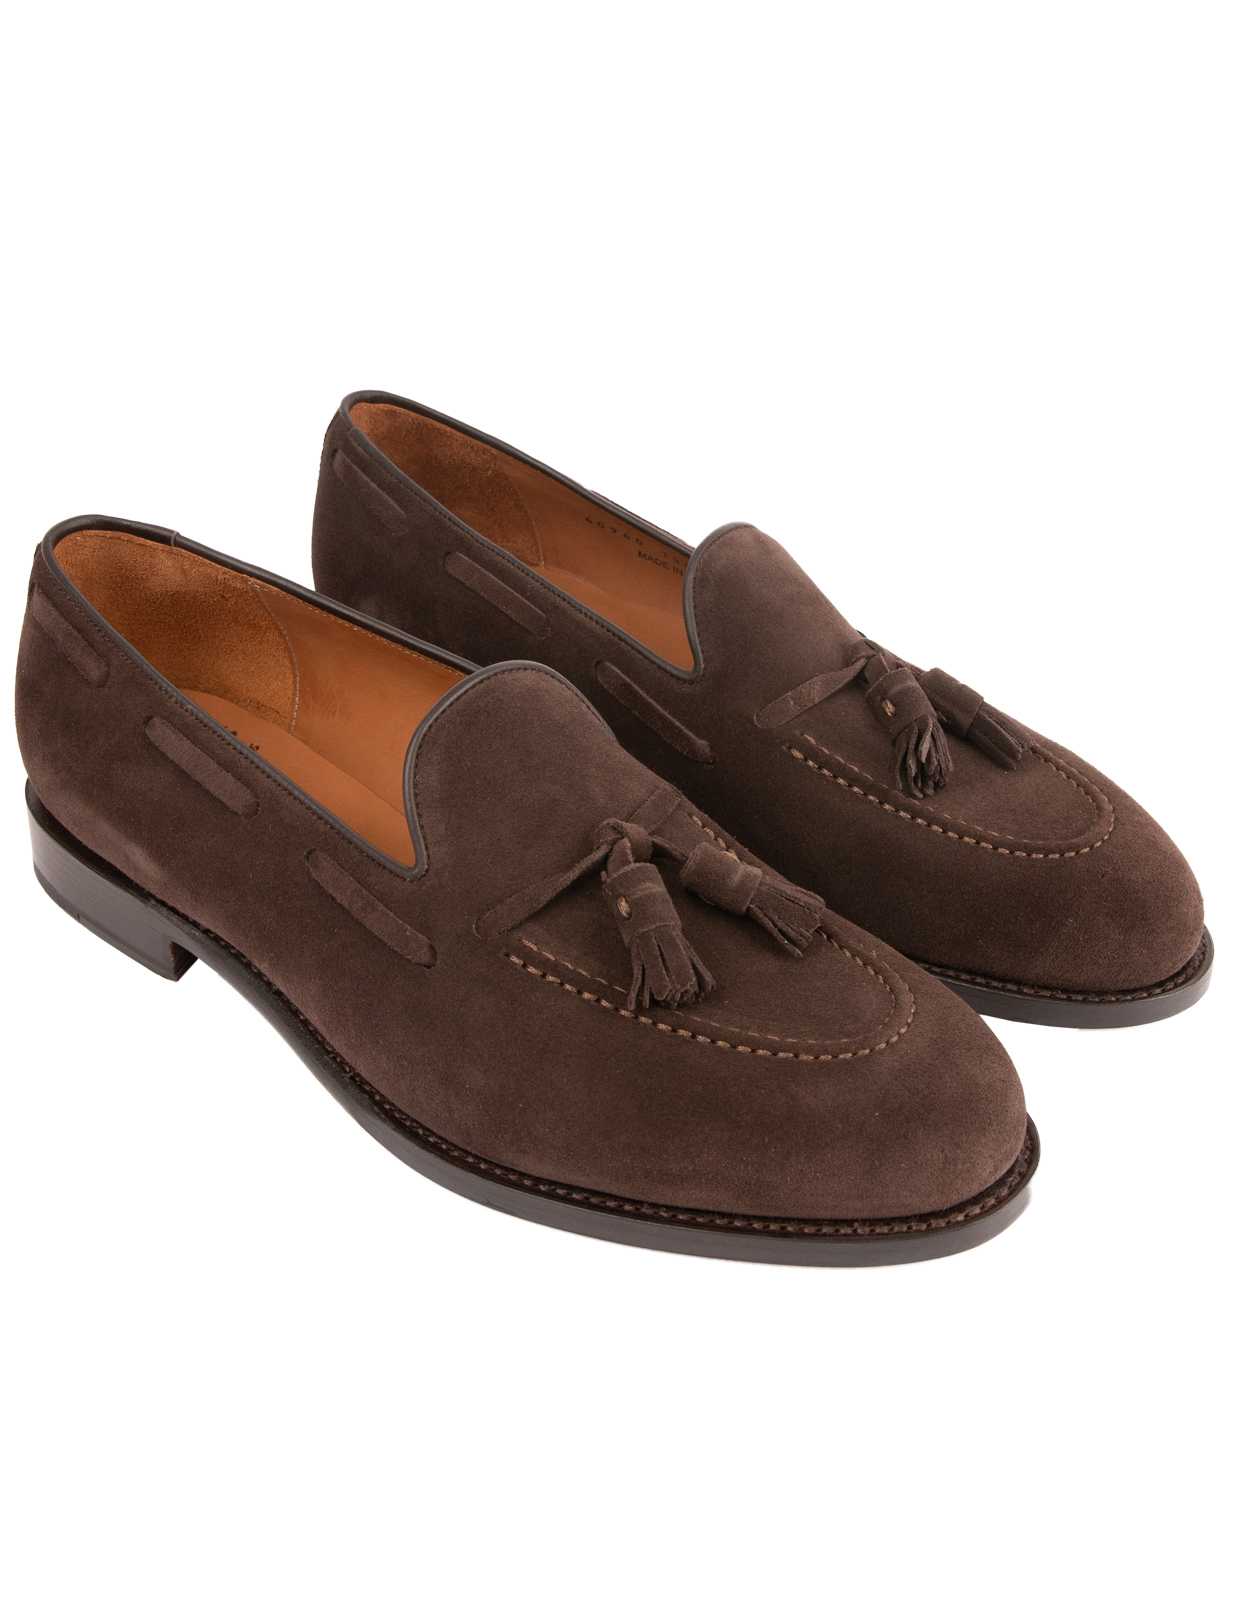 Tassel Loafers Suede Bitter Chocolate Stl 8